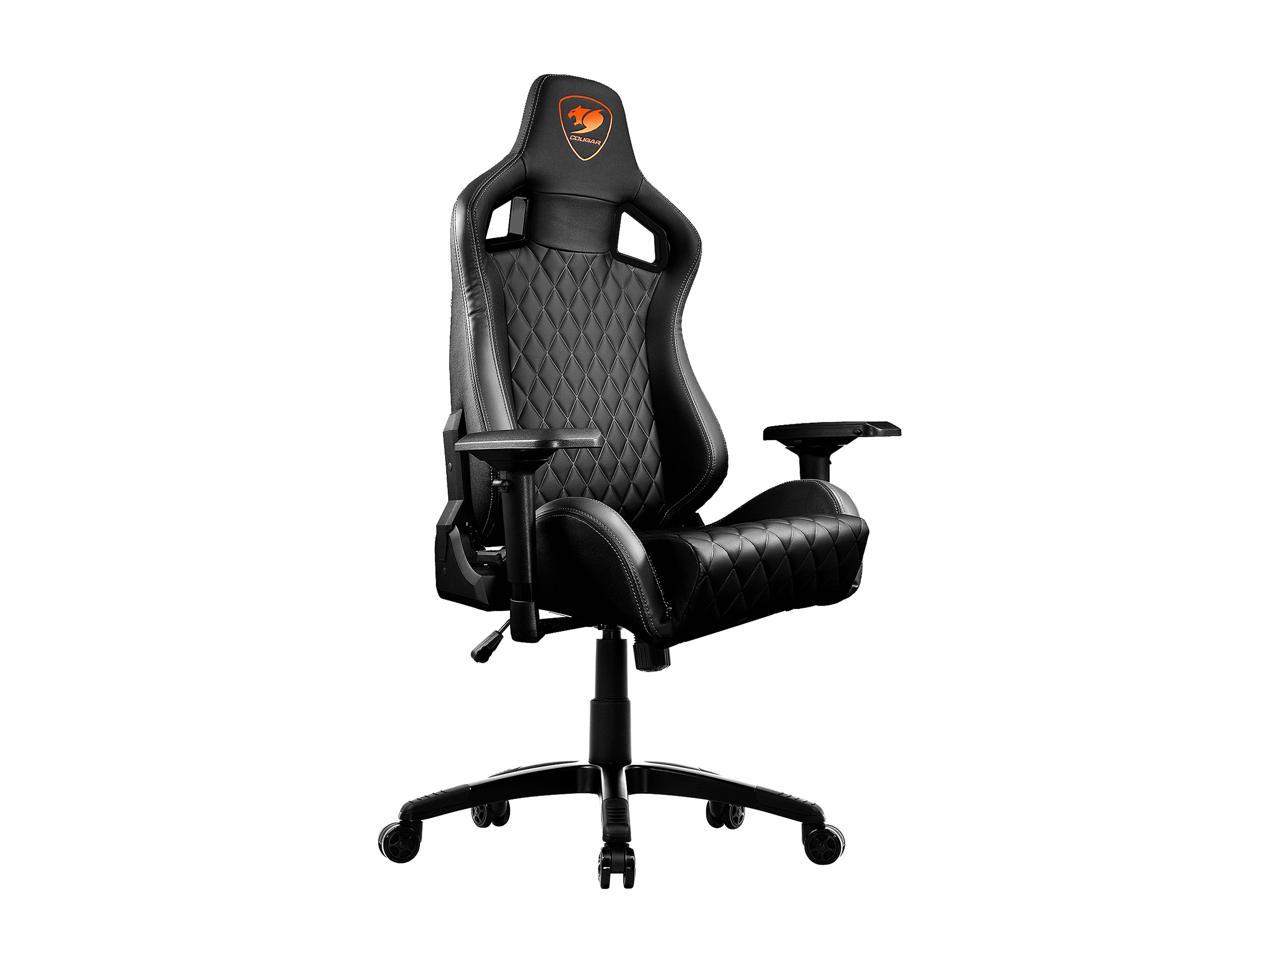 Cougar Armor S (Black) Luxury Gaming Chair with Breathable Premium PVC Leather and Body-embracing High Back Design